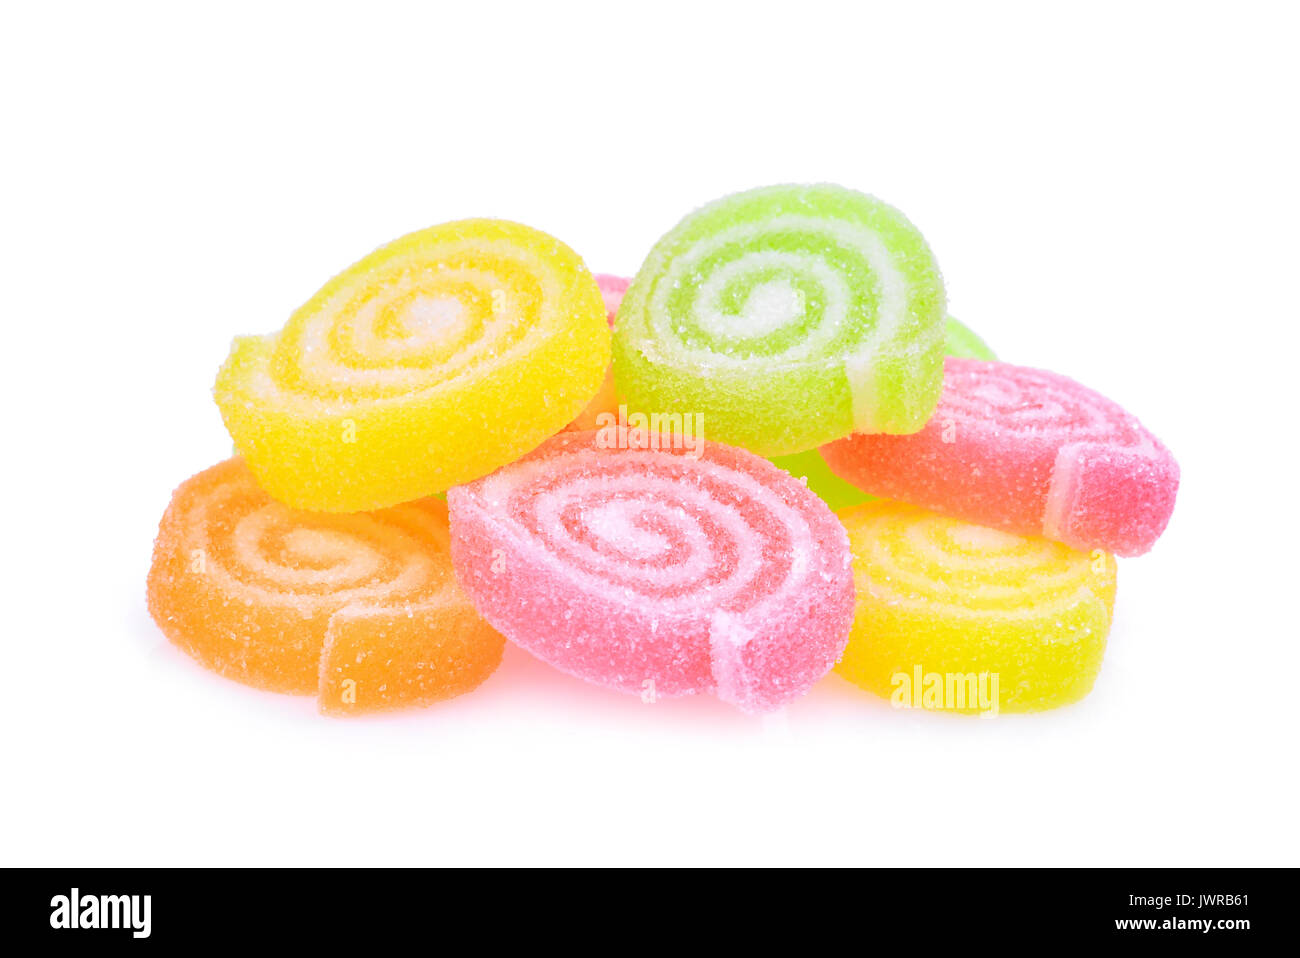 jelly sweet, flavor fruit or candy dessert colorful with sugar isolated on white background, food is not good for health Stock Photo